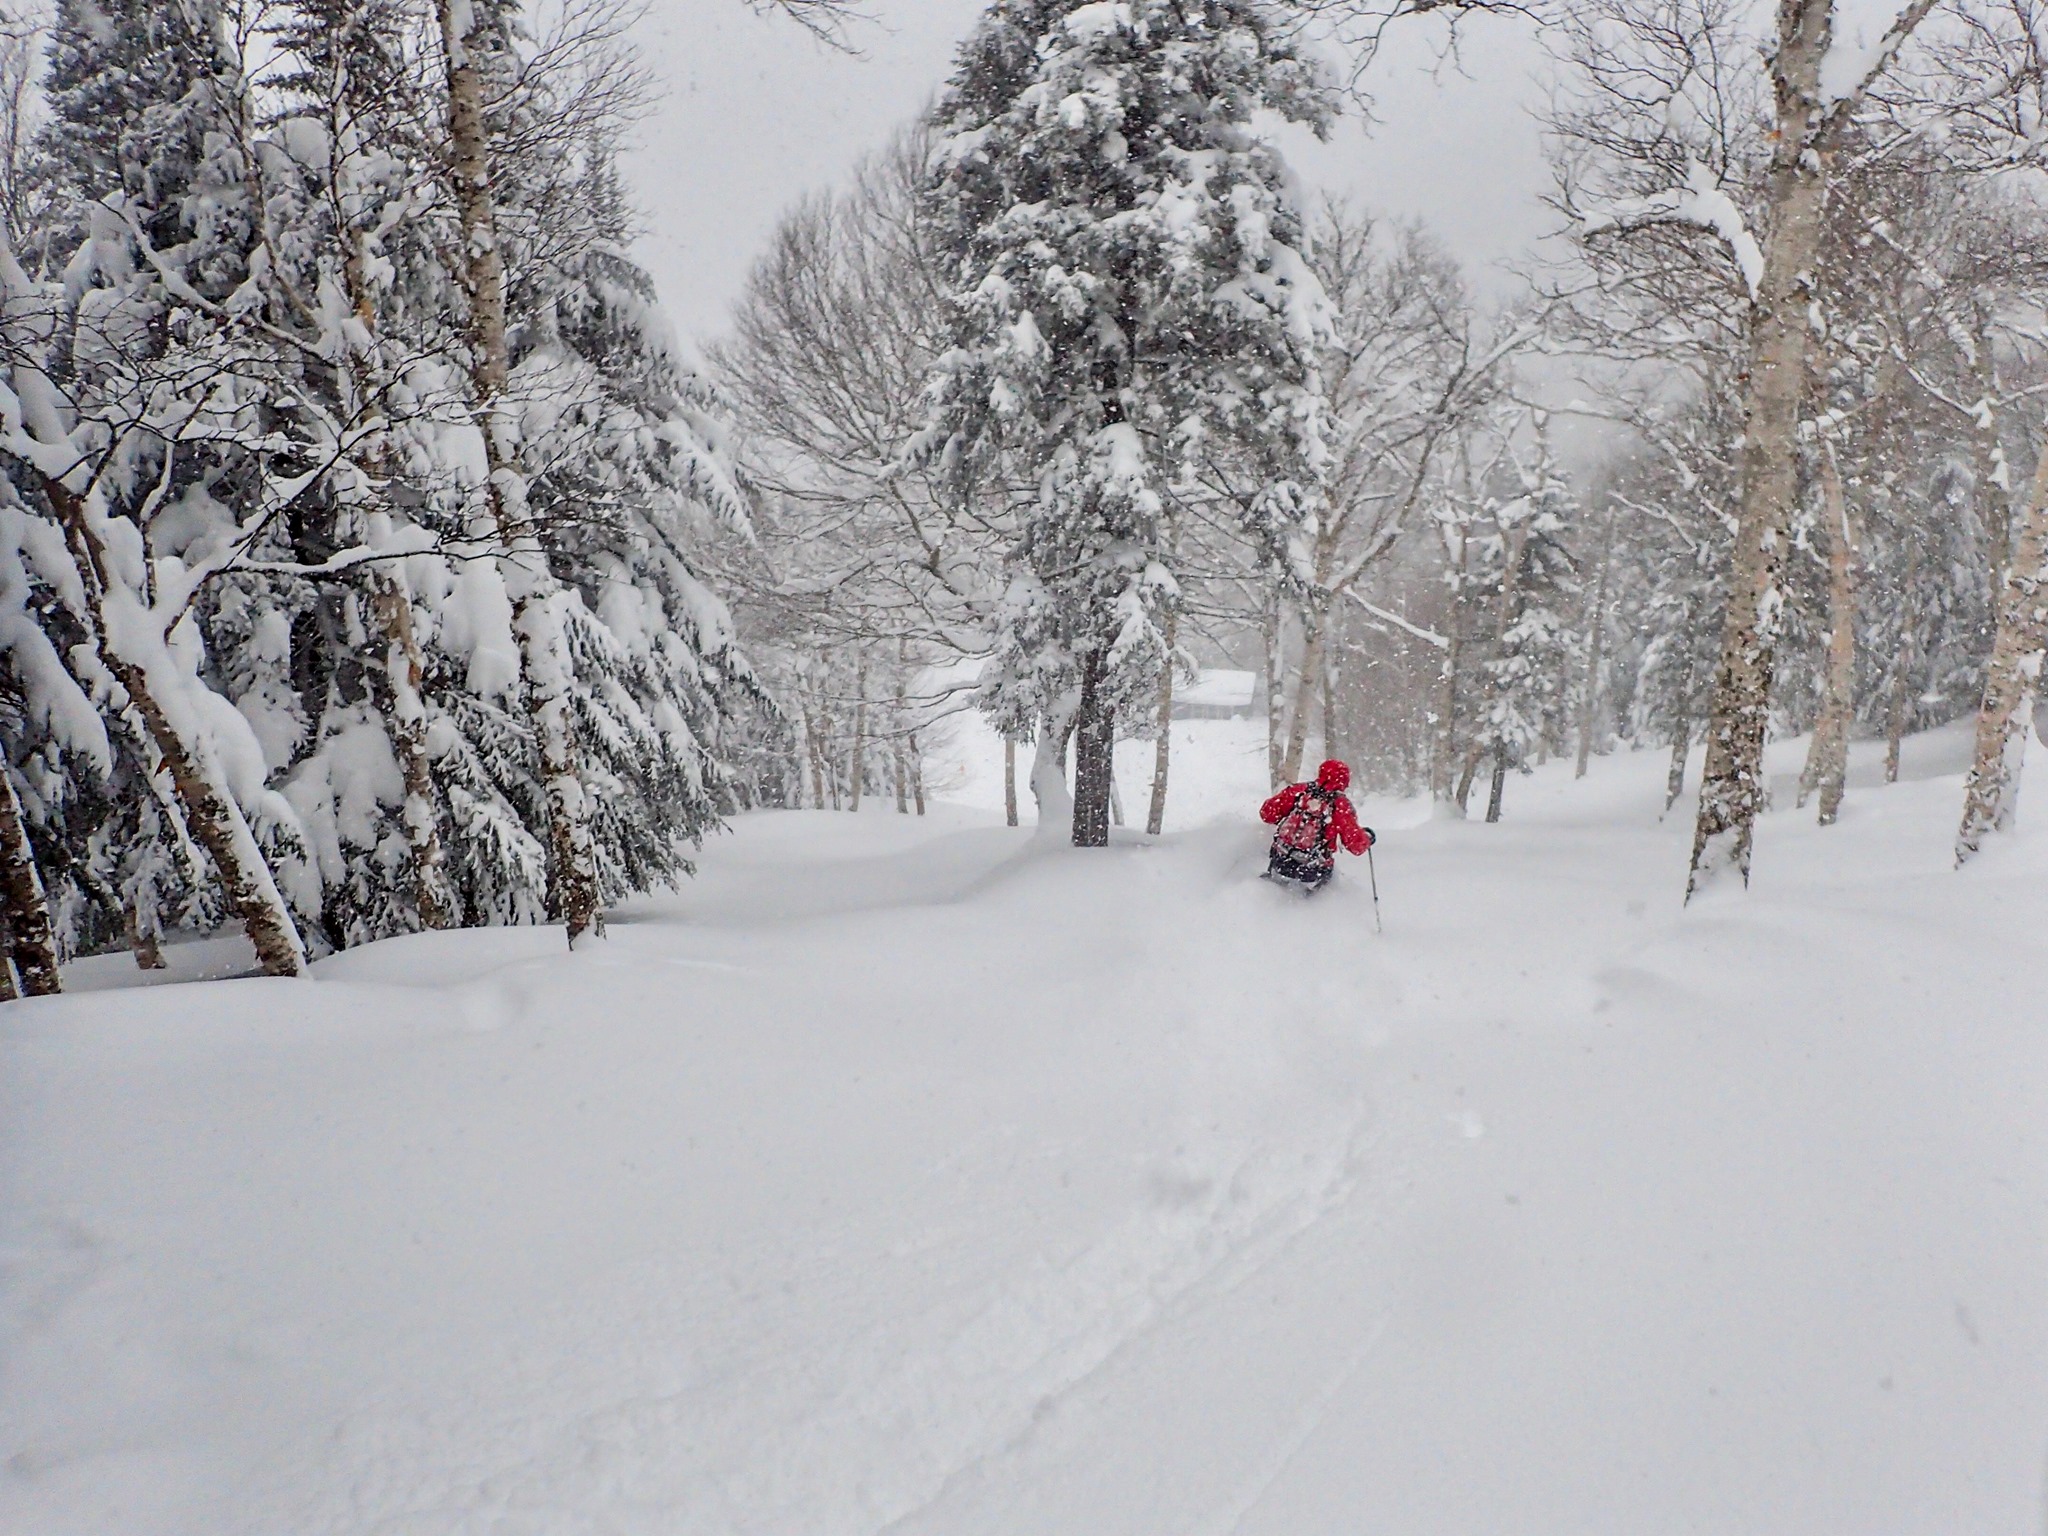 20" (60cm) in the past 30hrs, Smuggler's Notch